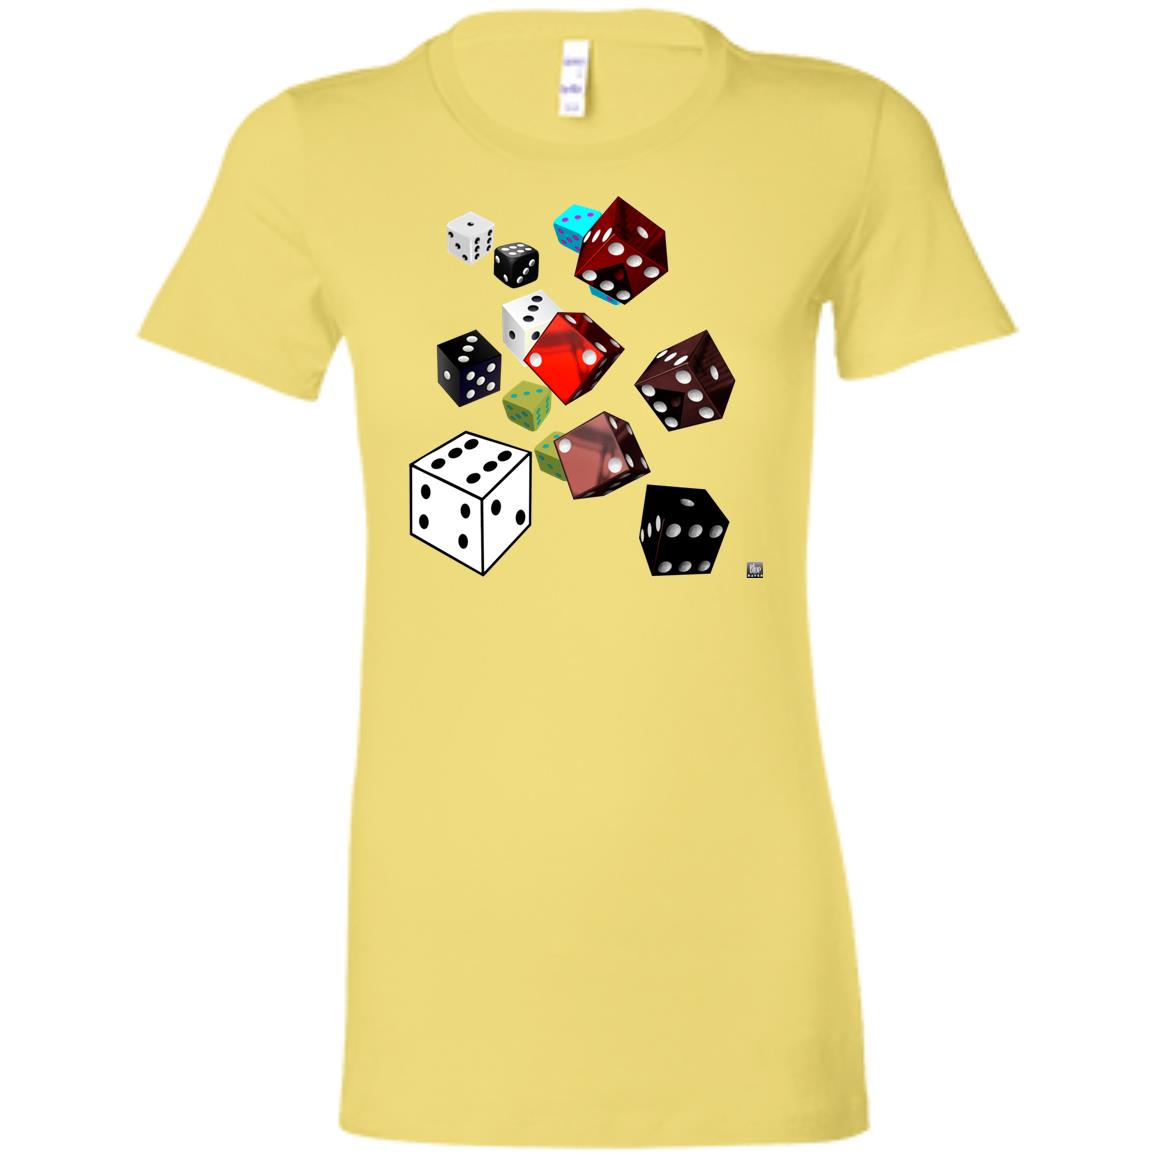 roll of the dice - Women's Fitted T-Shirt